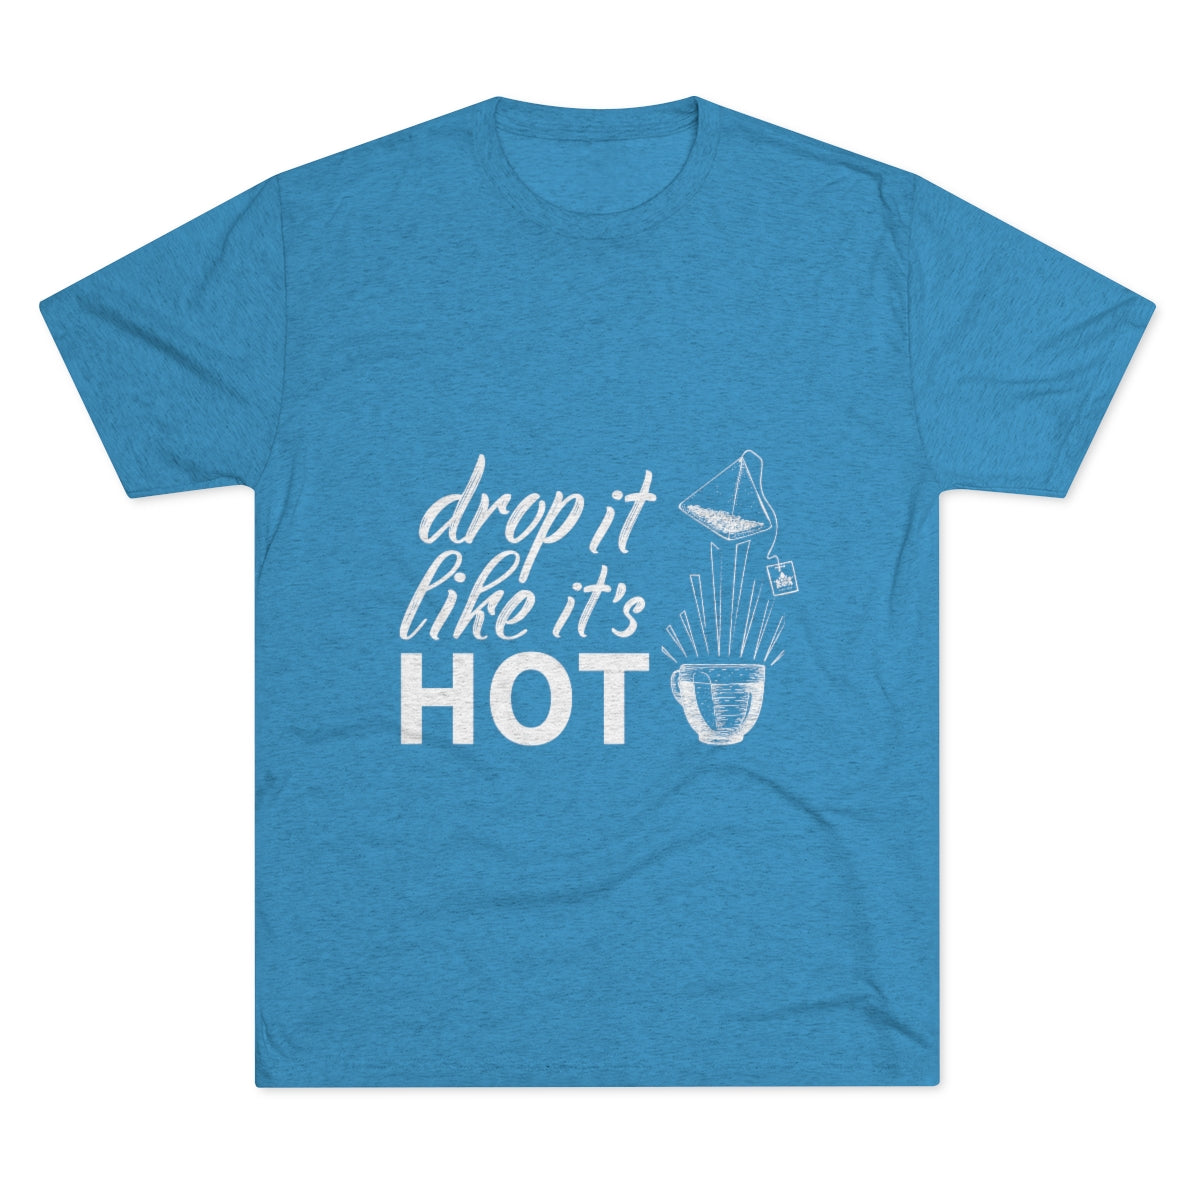 Drop It Like It's Hot Graphic Tee - Tri-Blend Vintage Turquoise S - Harney & Sons Fine Teas